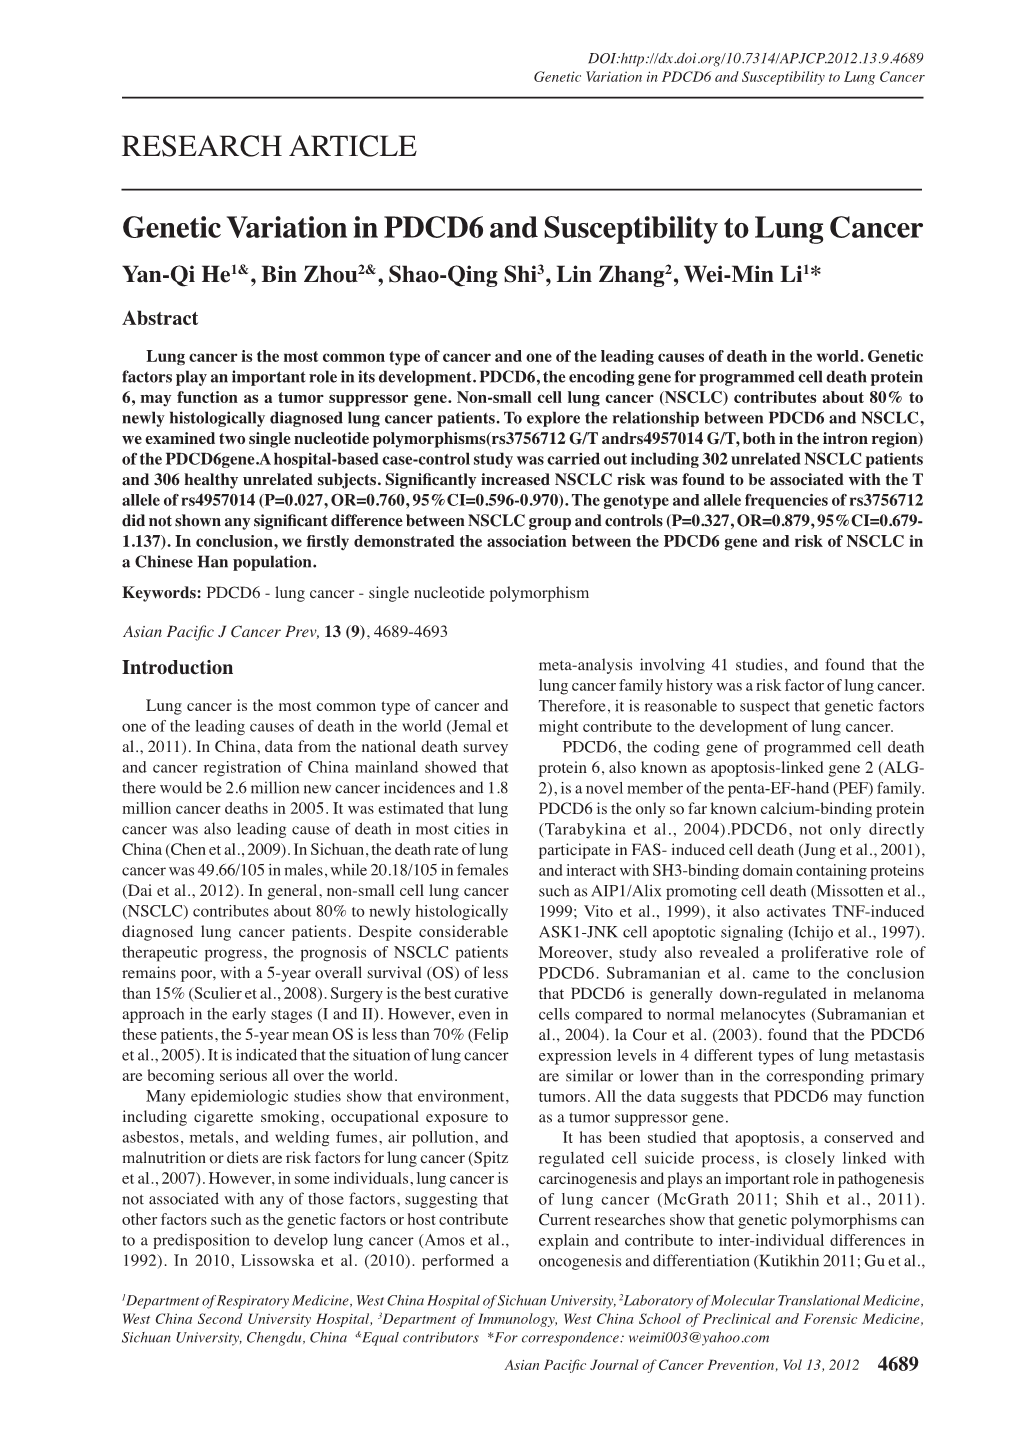 Genetic Variation in PDCD6 and Susceptibility to Lung Cancer